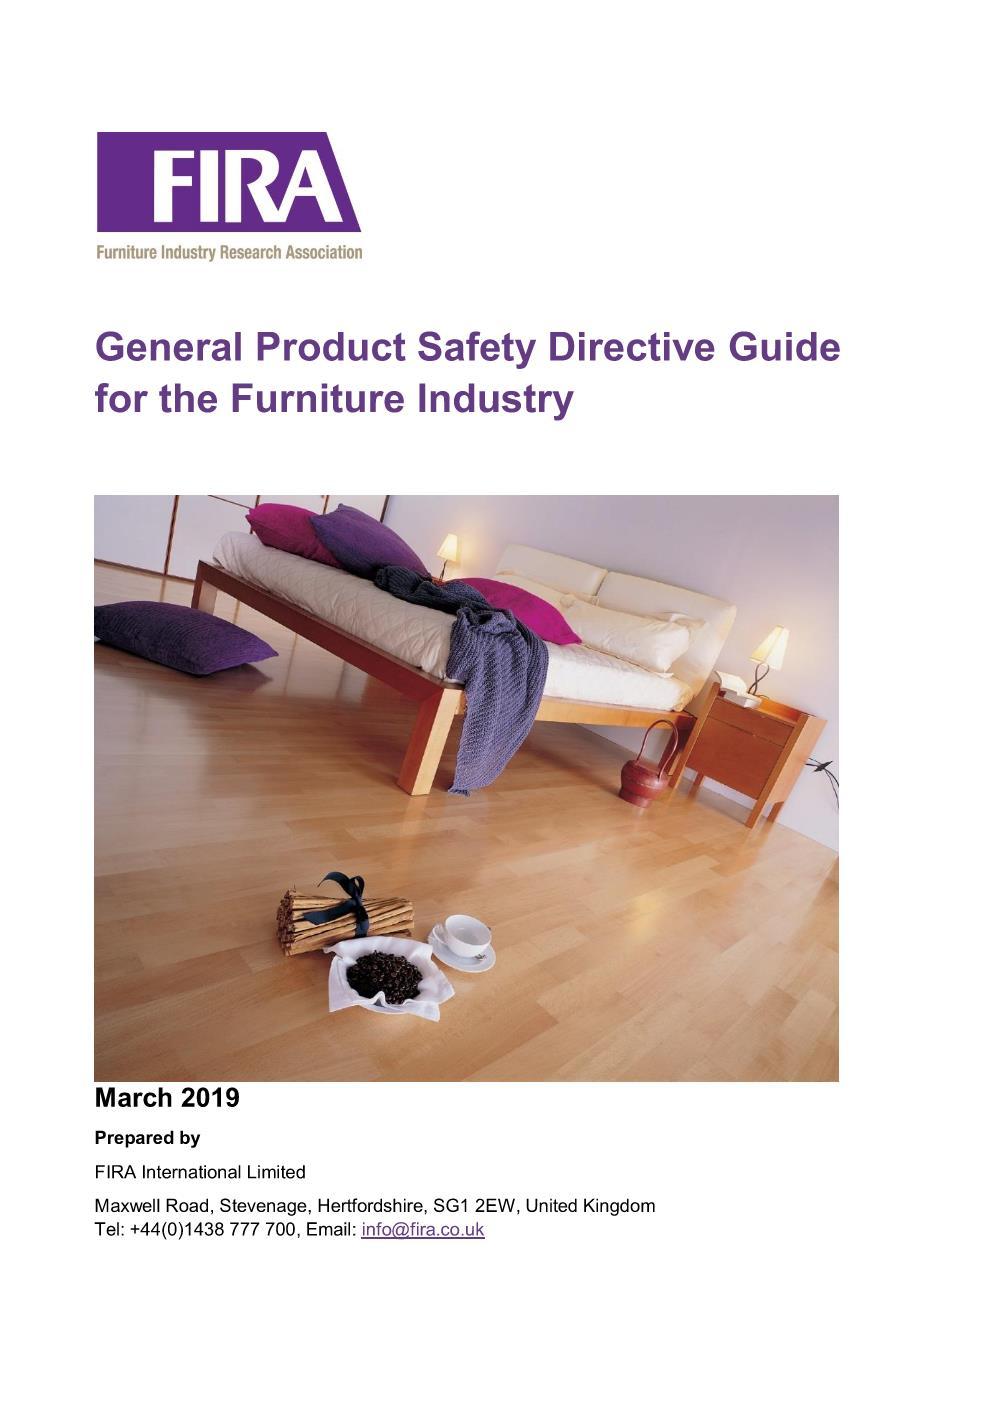 General Product Safety Directive Guide for the Furniture Industry